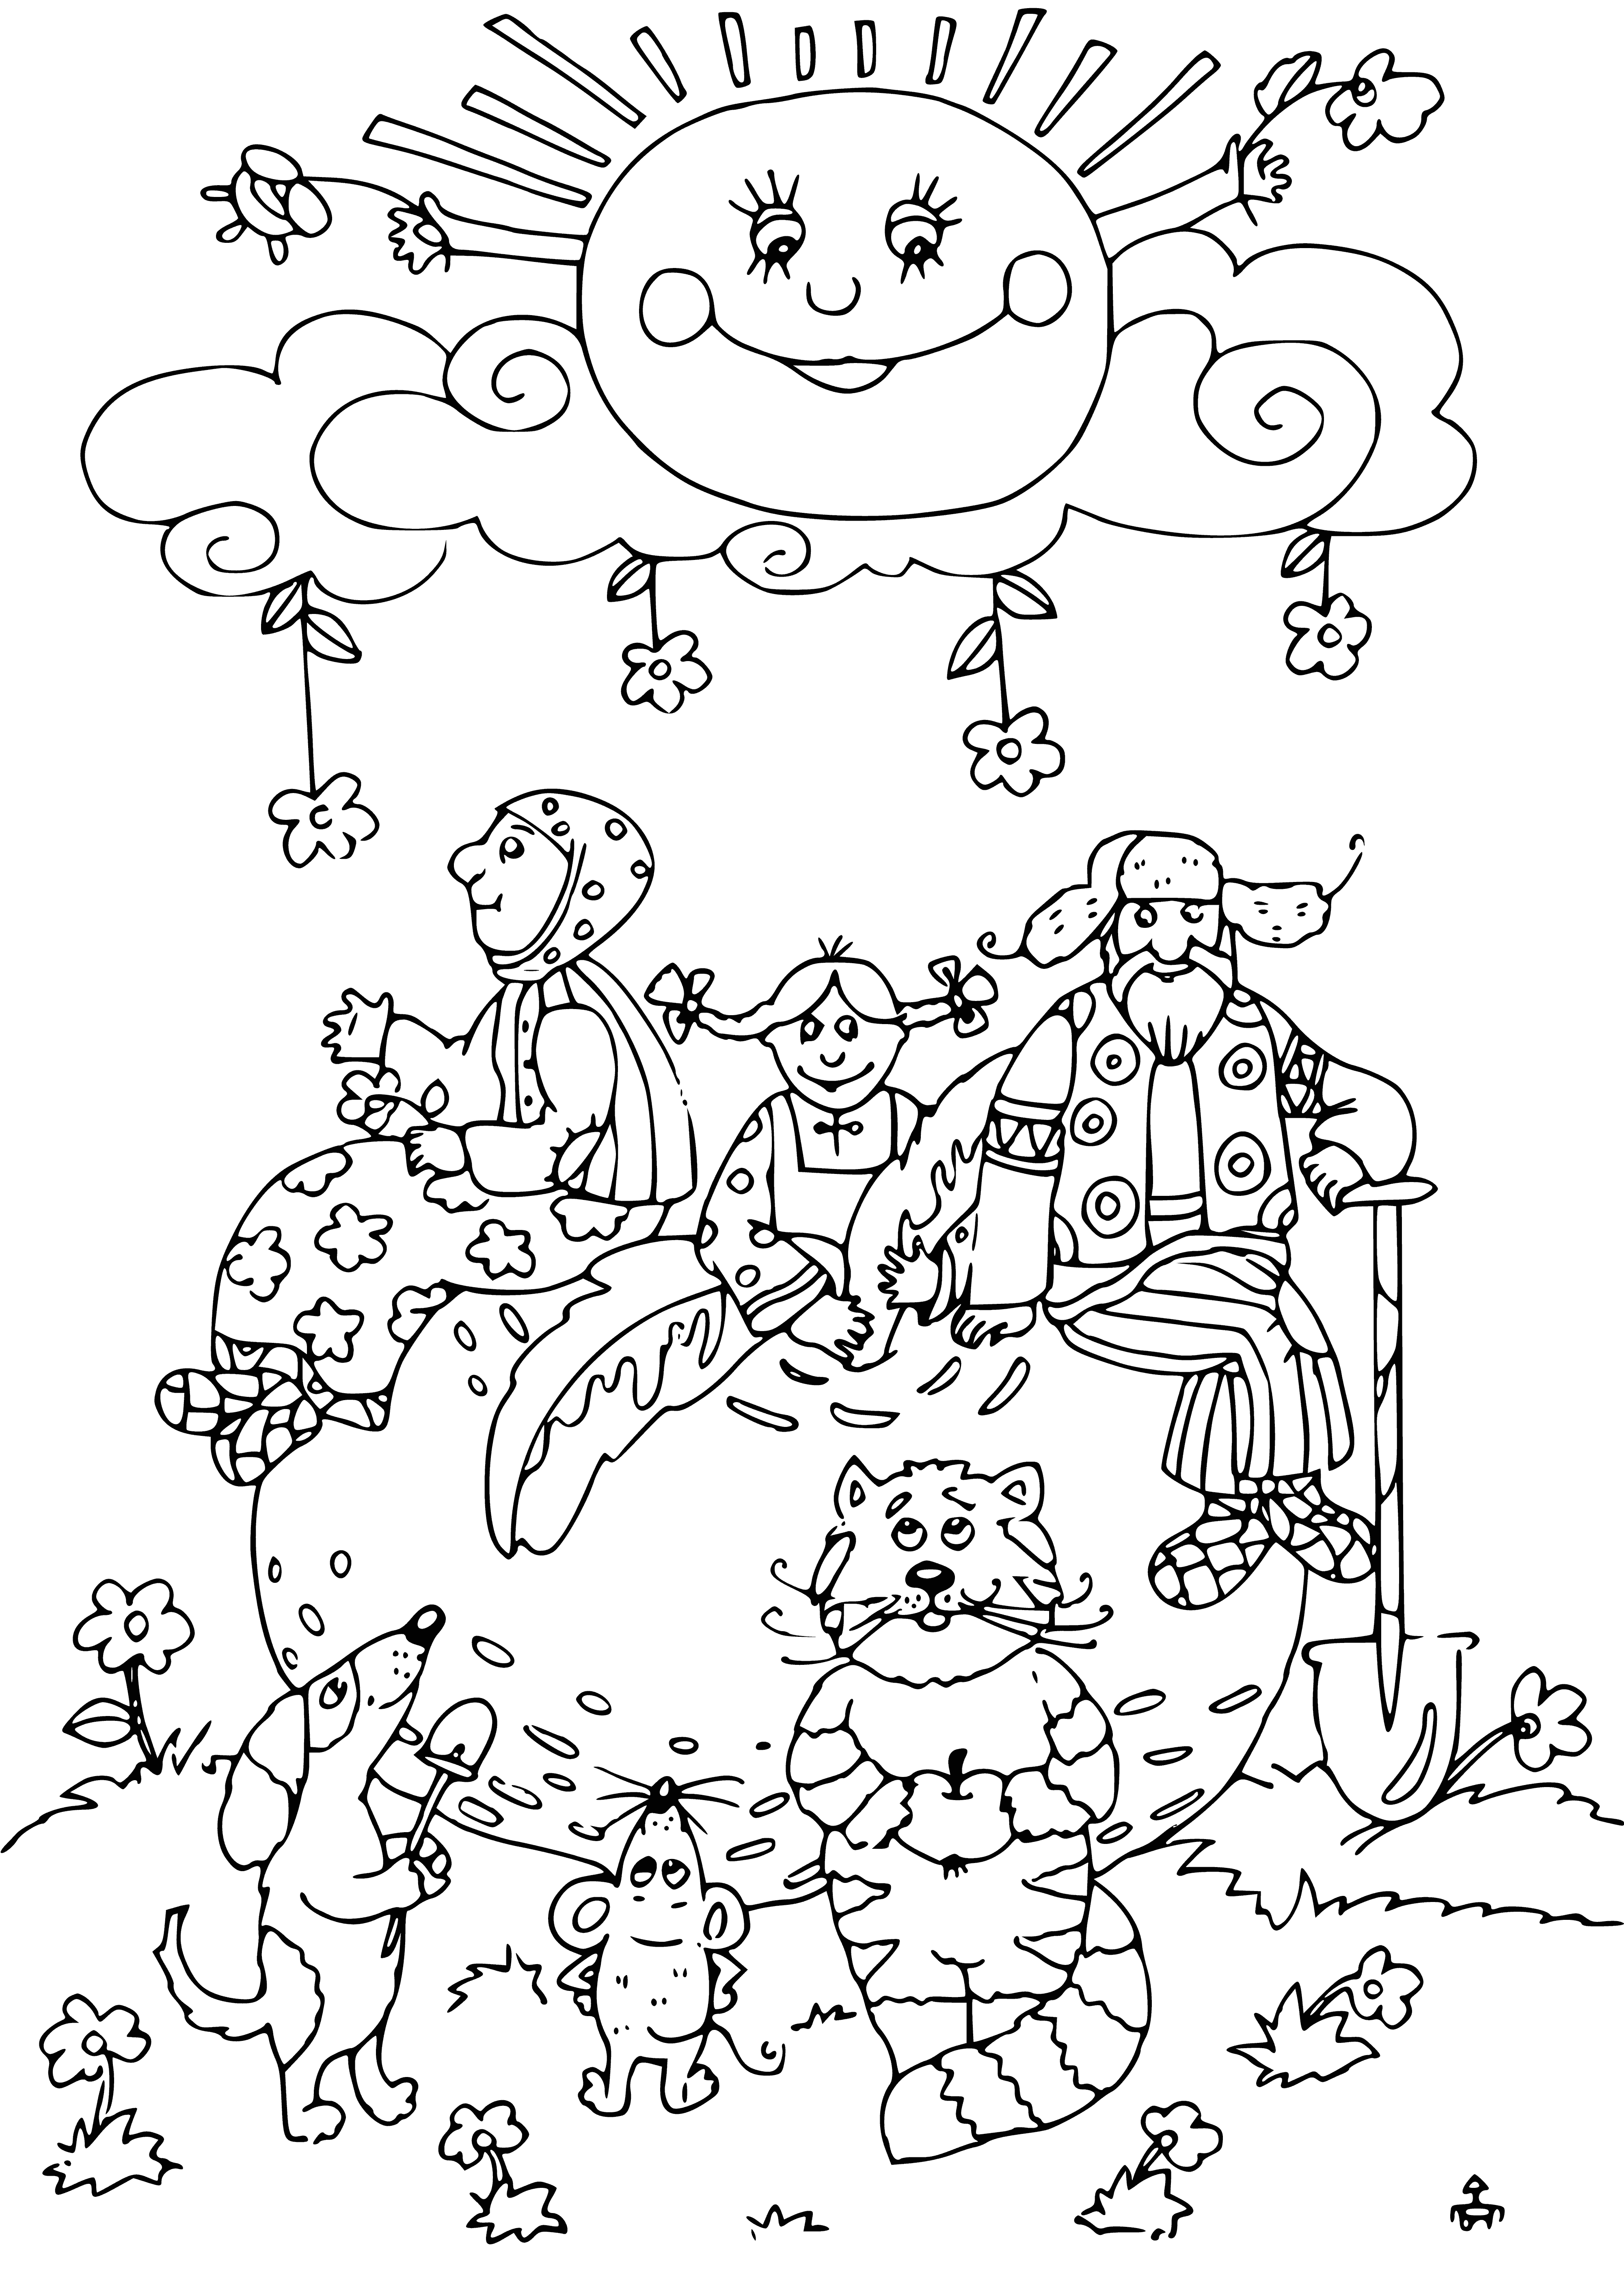 coloring page: Man pulls turnip from ground with help from woman and rabbit. Finally get it out.